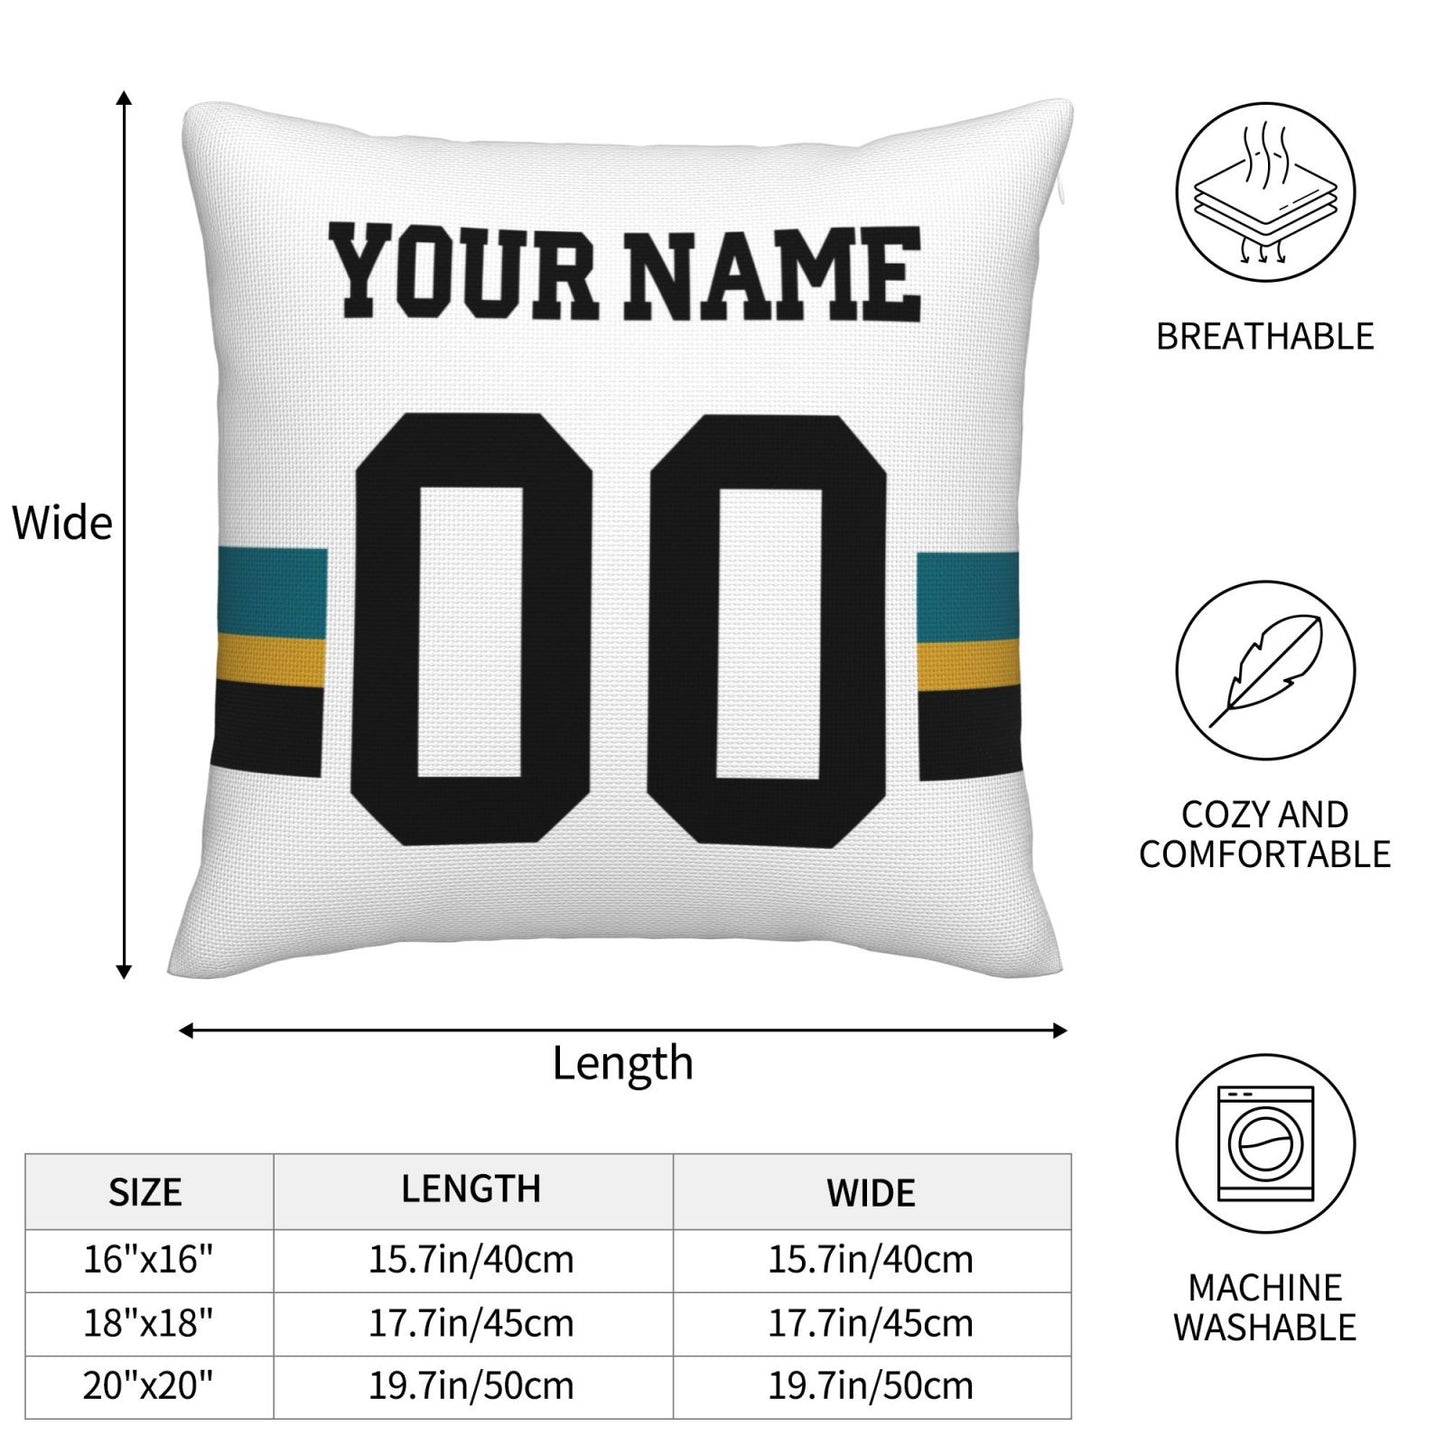 Customized Jacksonville Jaguars Football Team Decorative Throw Pillow Case Print Personalized Football Style Fans Letters & Number White Pillowcase Housewarming Gifts